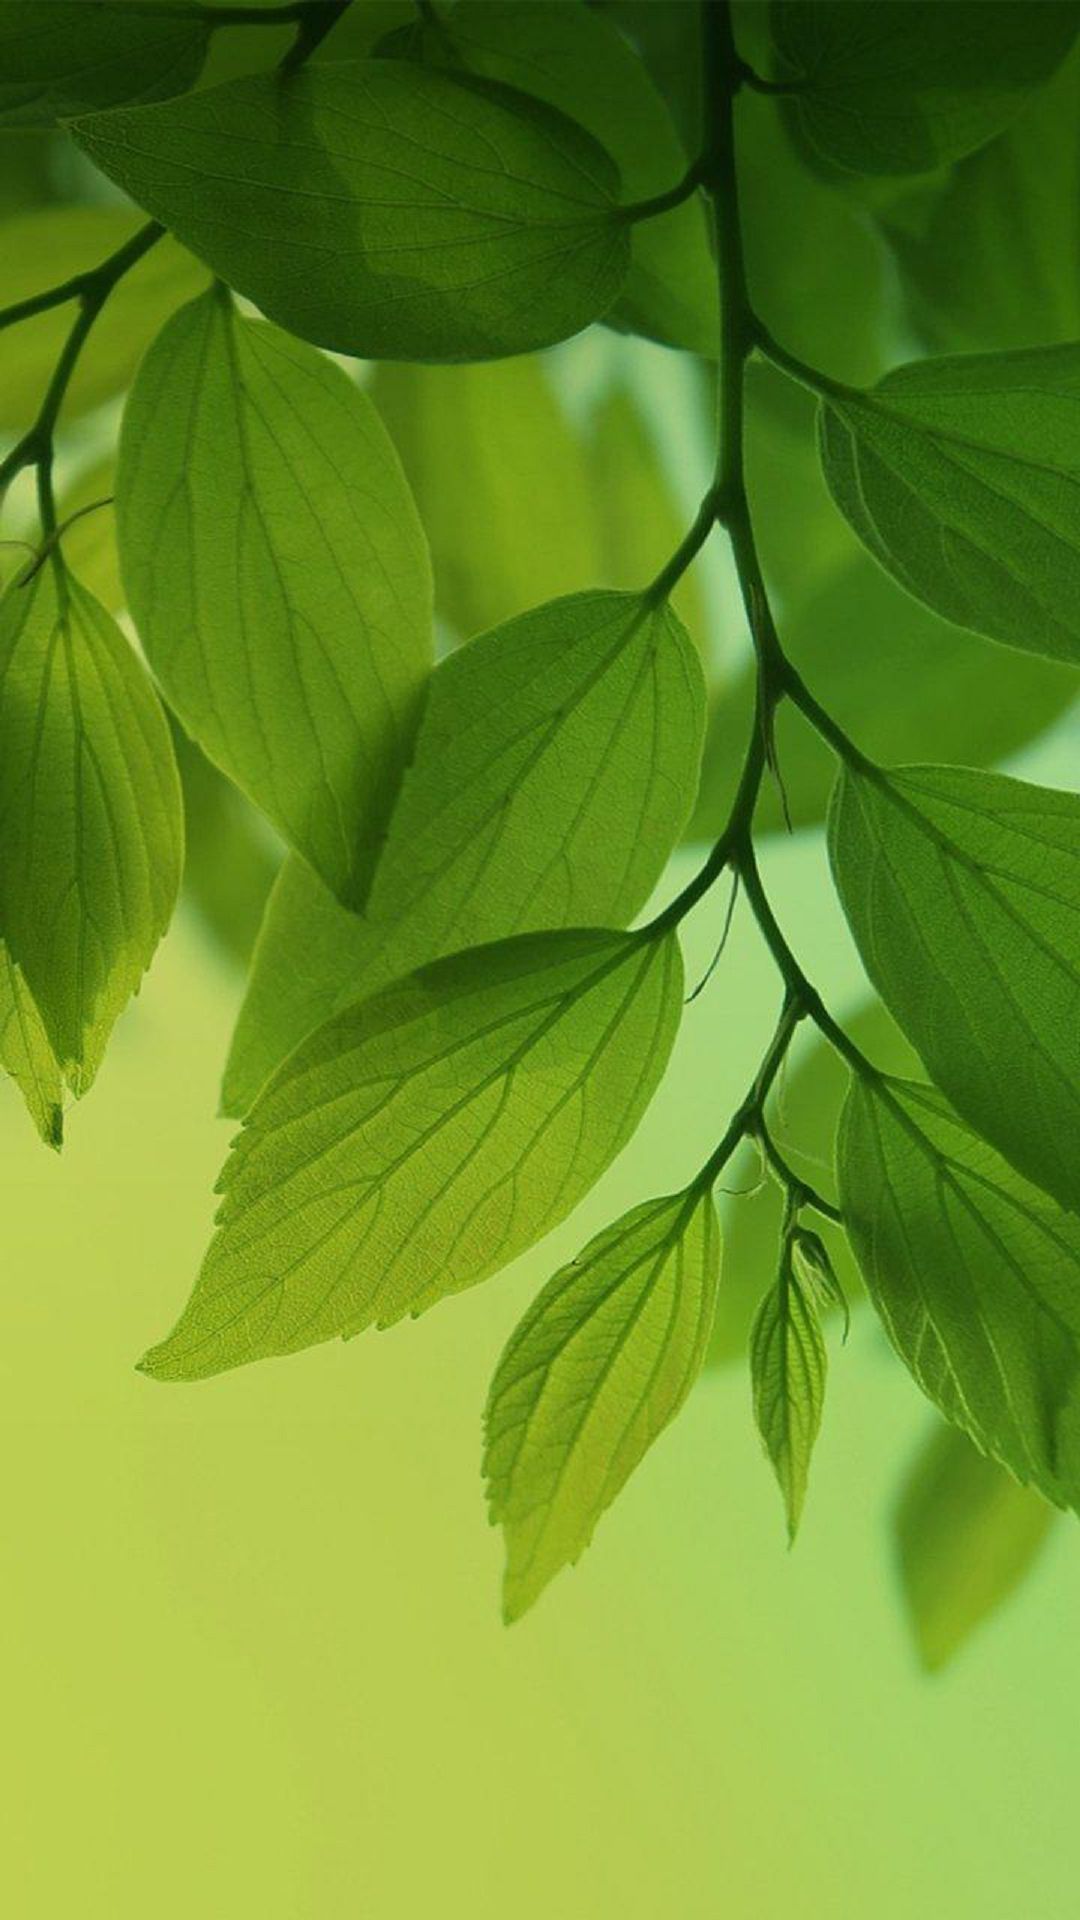 HD Green Leaves Tree Android Wallpaper free download